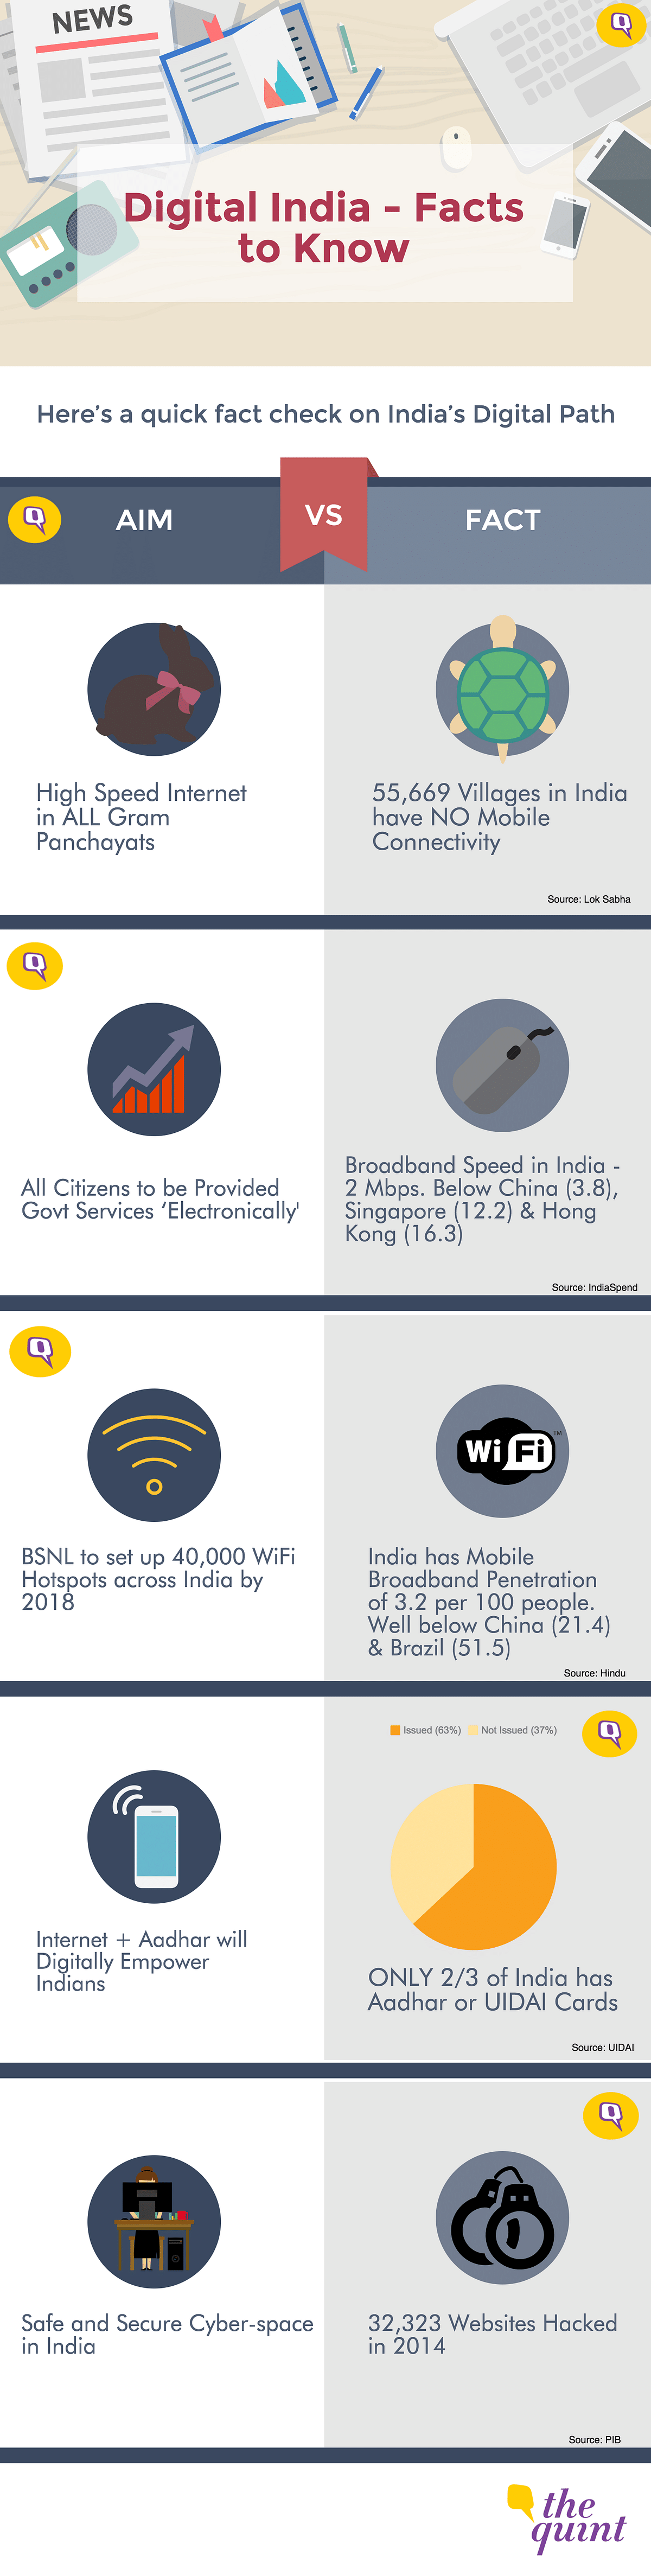 Here’s a quick fact check on India’s Digital Path.